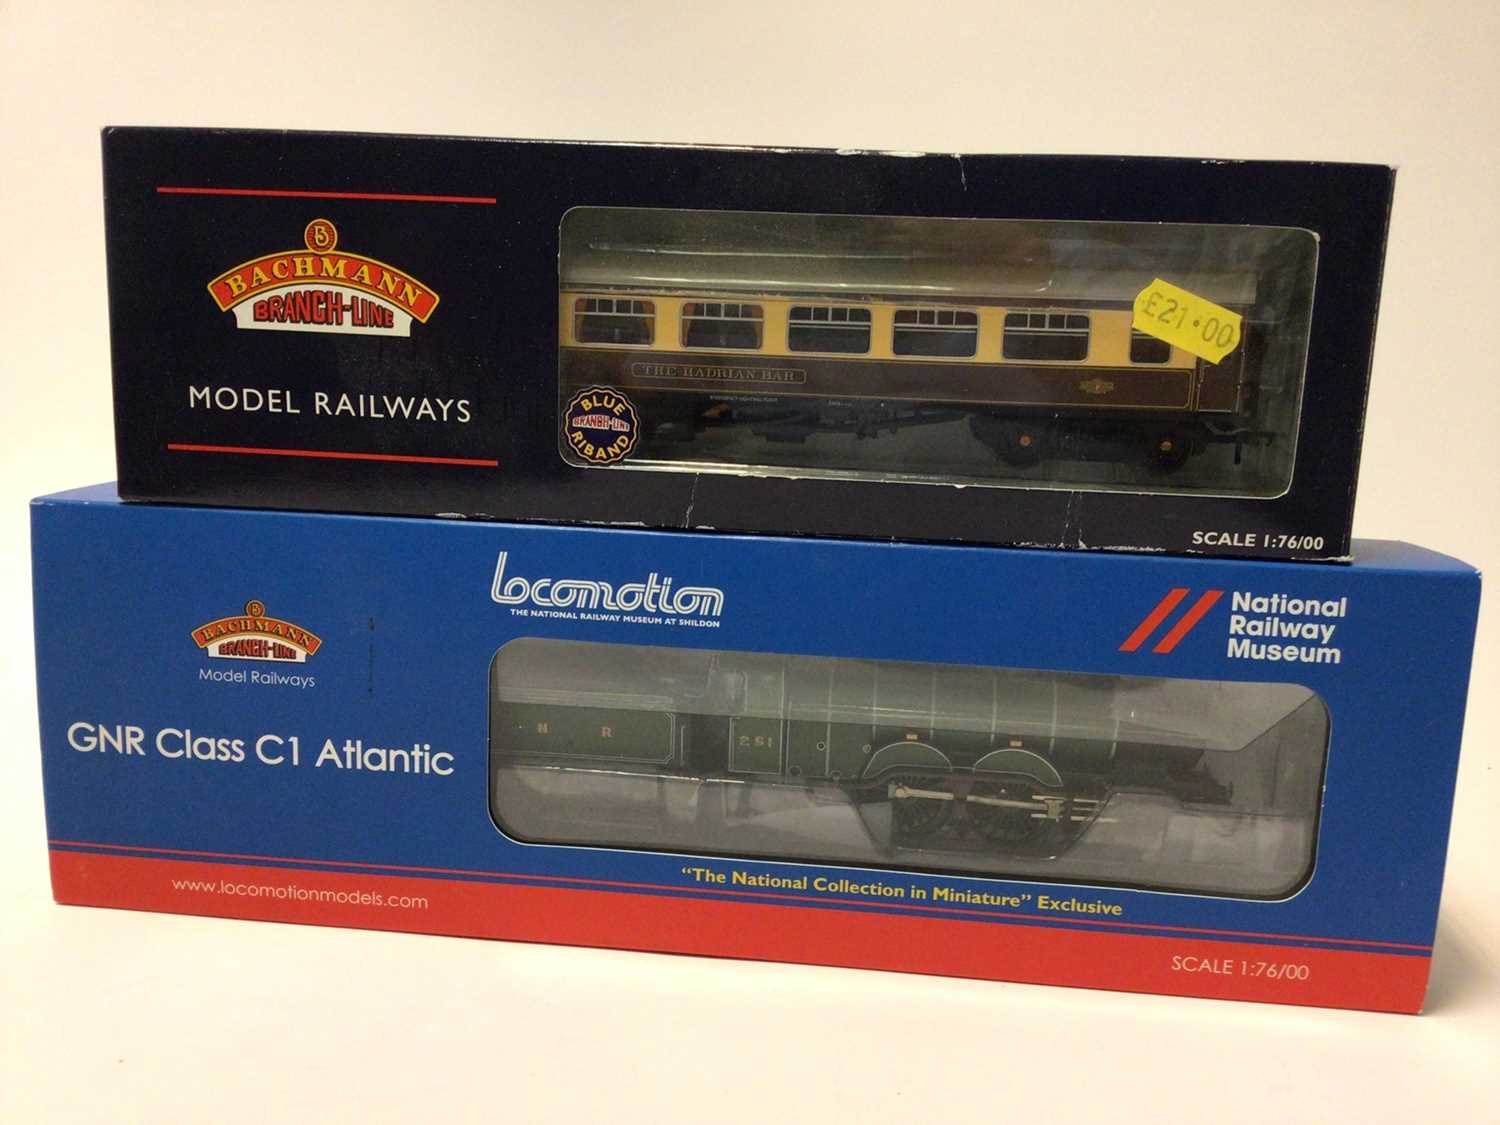 Railway OO Gauge boxed selection including Hornby Class N2 locomotive "69456", R 2178 A Class M7 loc - Image 2 of 6